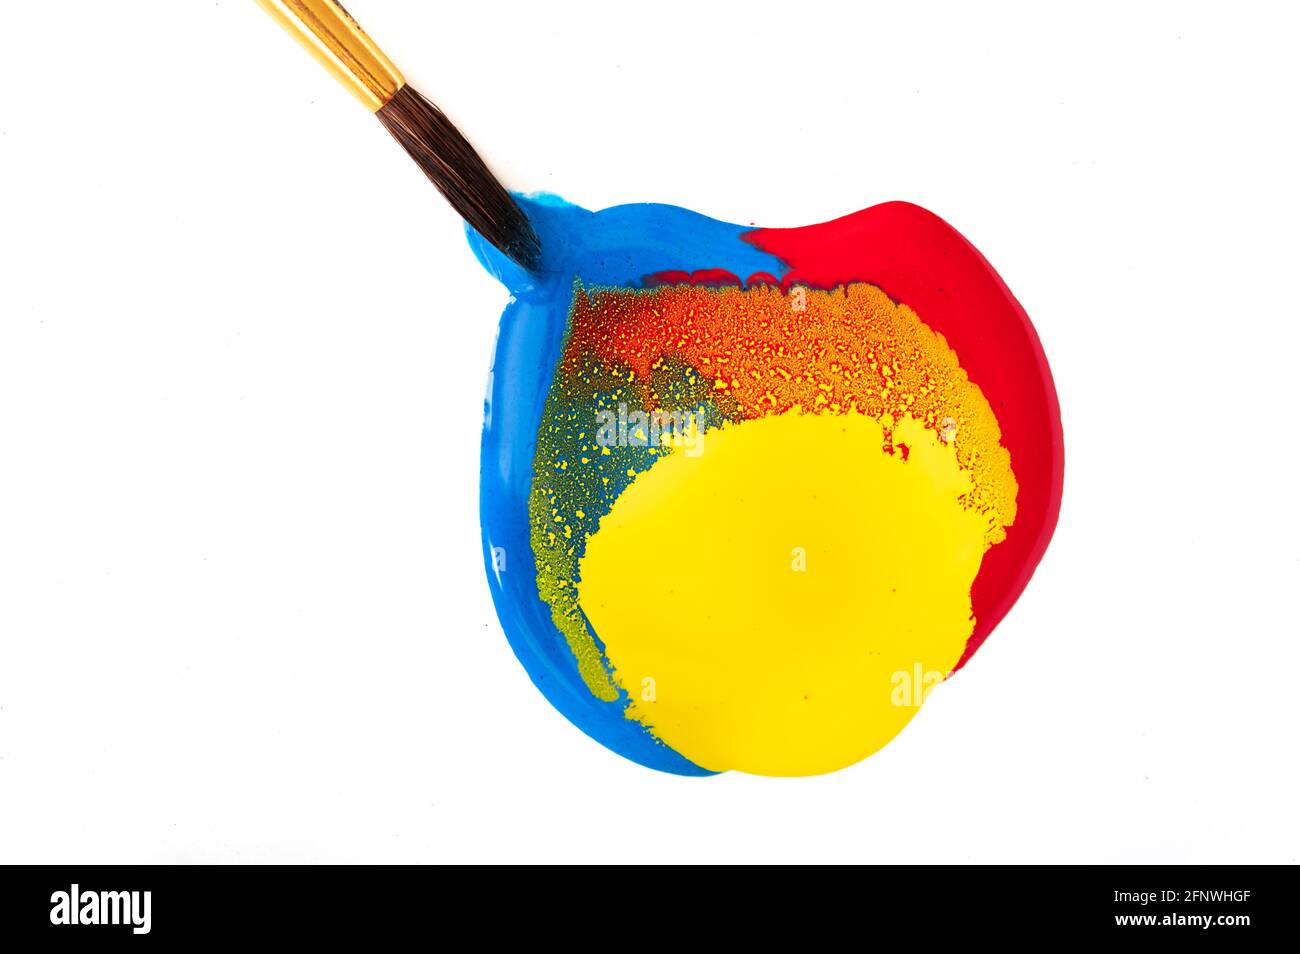 Red, yellow, and blue paint with paintbrush dipped in Stock Photo